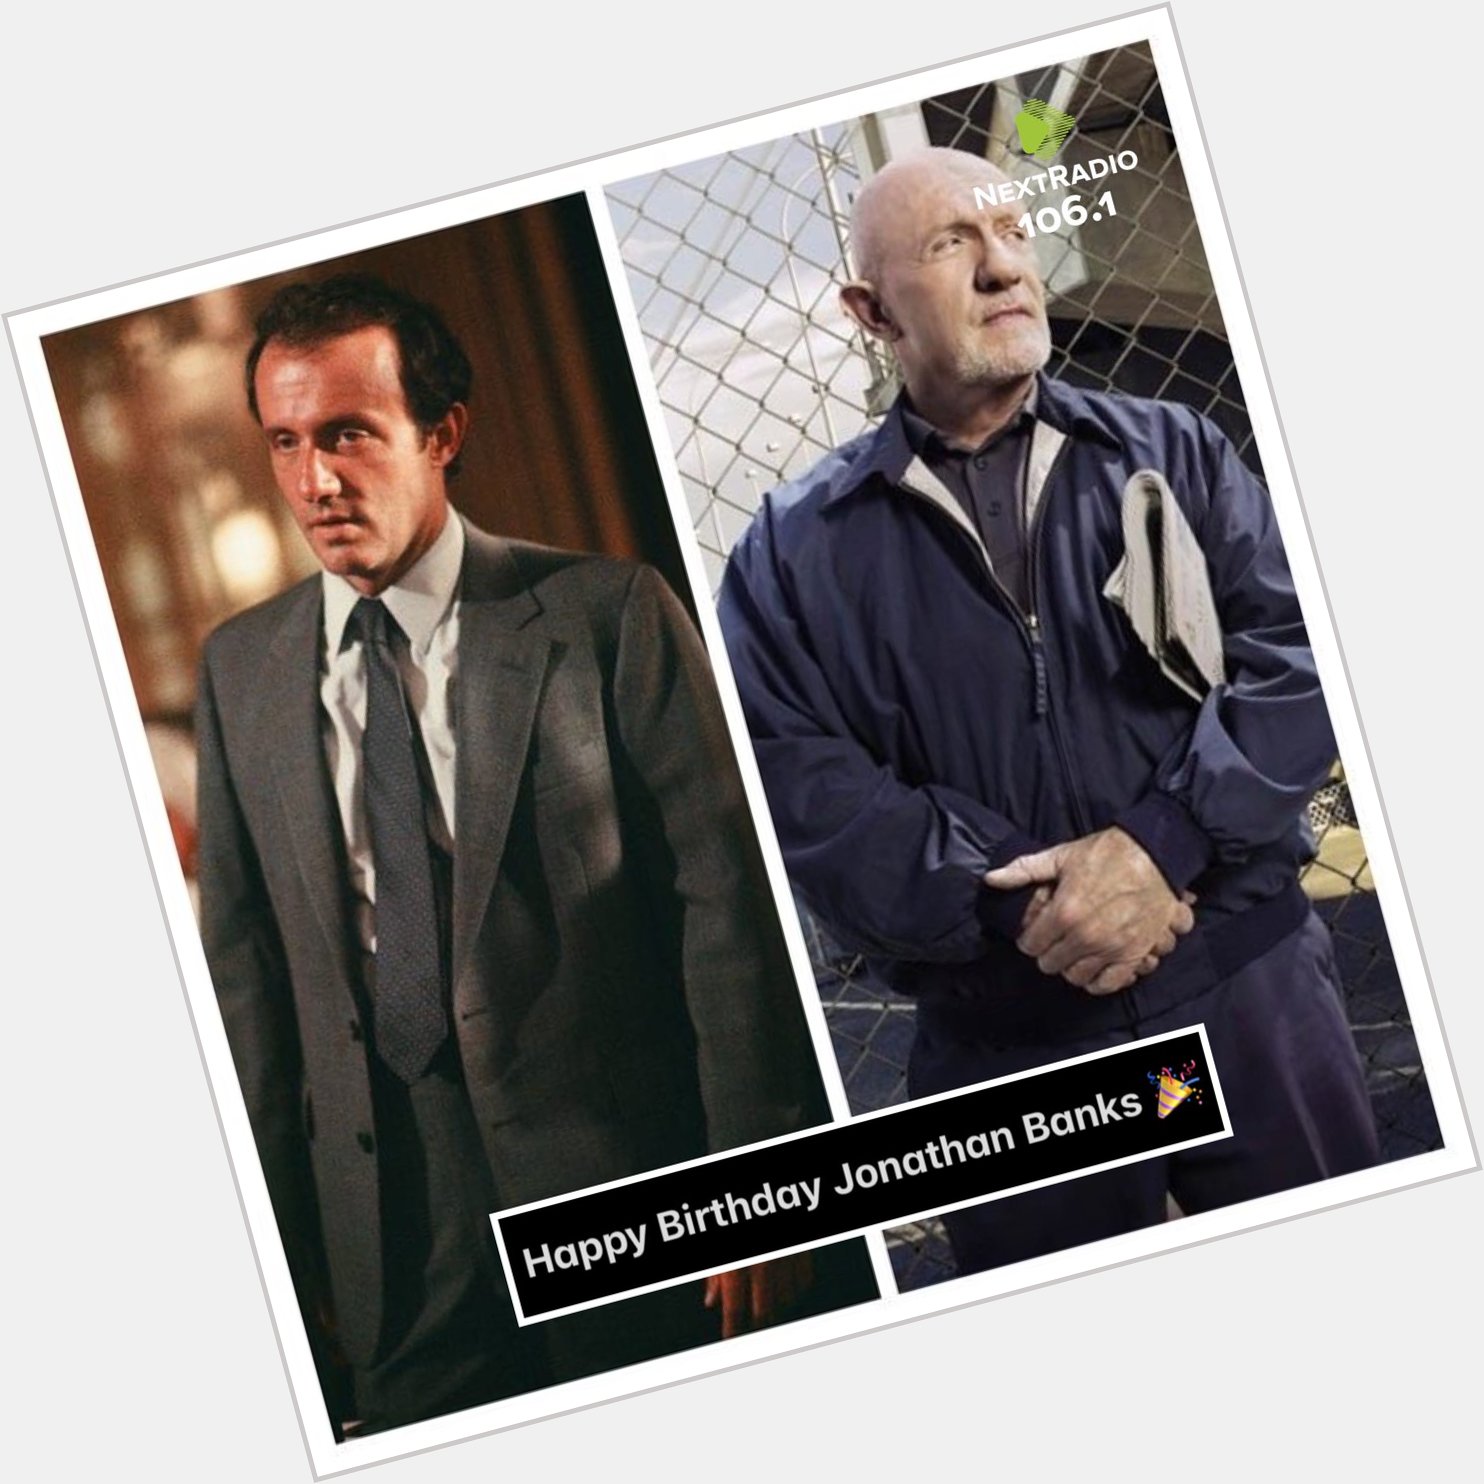 Happy Birthday, Jonathan Banks!! 

What\s your favorite movie from Jonathan Banks?

STAY TUNED| 